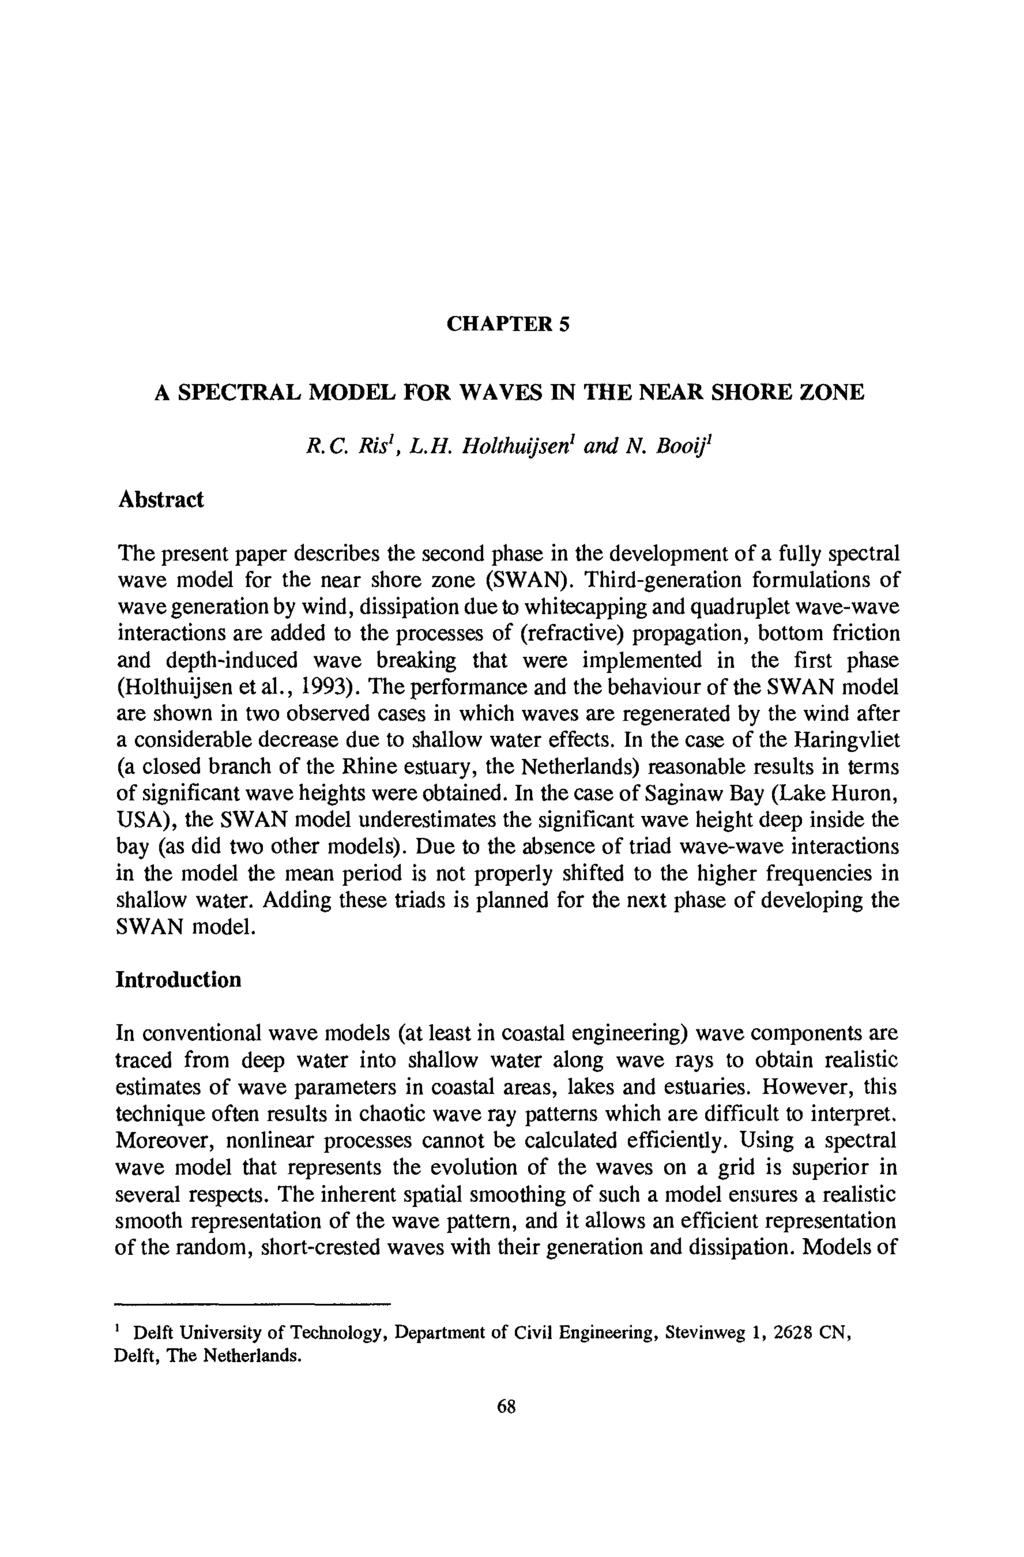 CHAPTER 5 A SPECTRAL MODEL FOR WAVES IN THE NEAR SHORE ZONE Abstract R.C. Ris', L.H. Holthuijsen' and N.